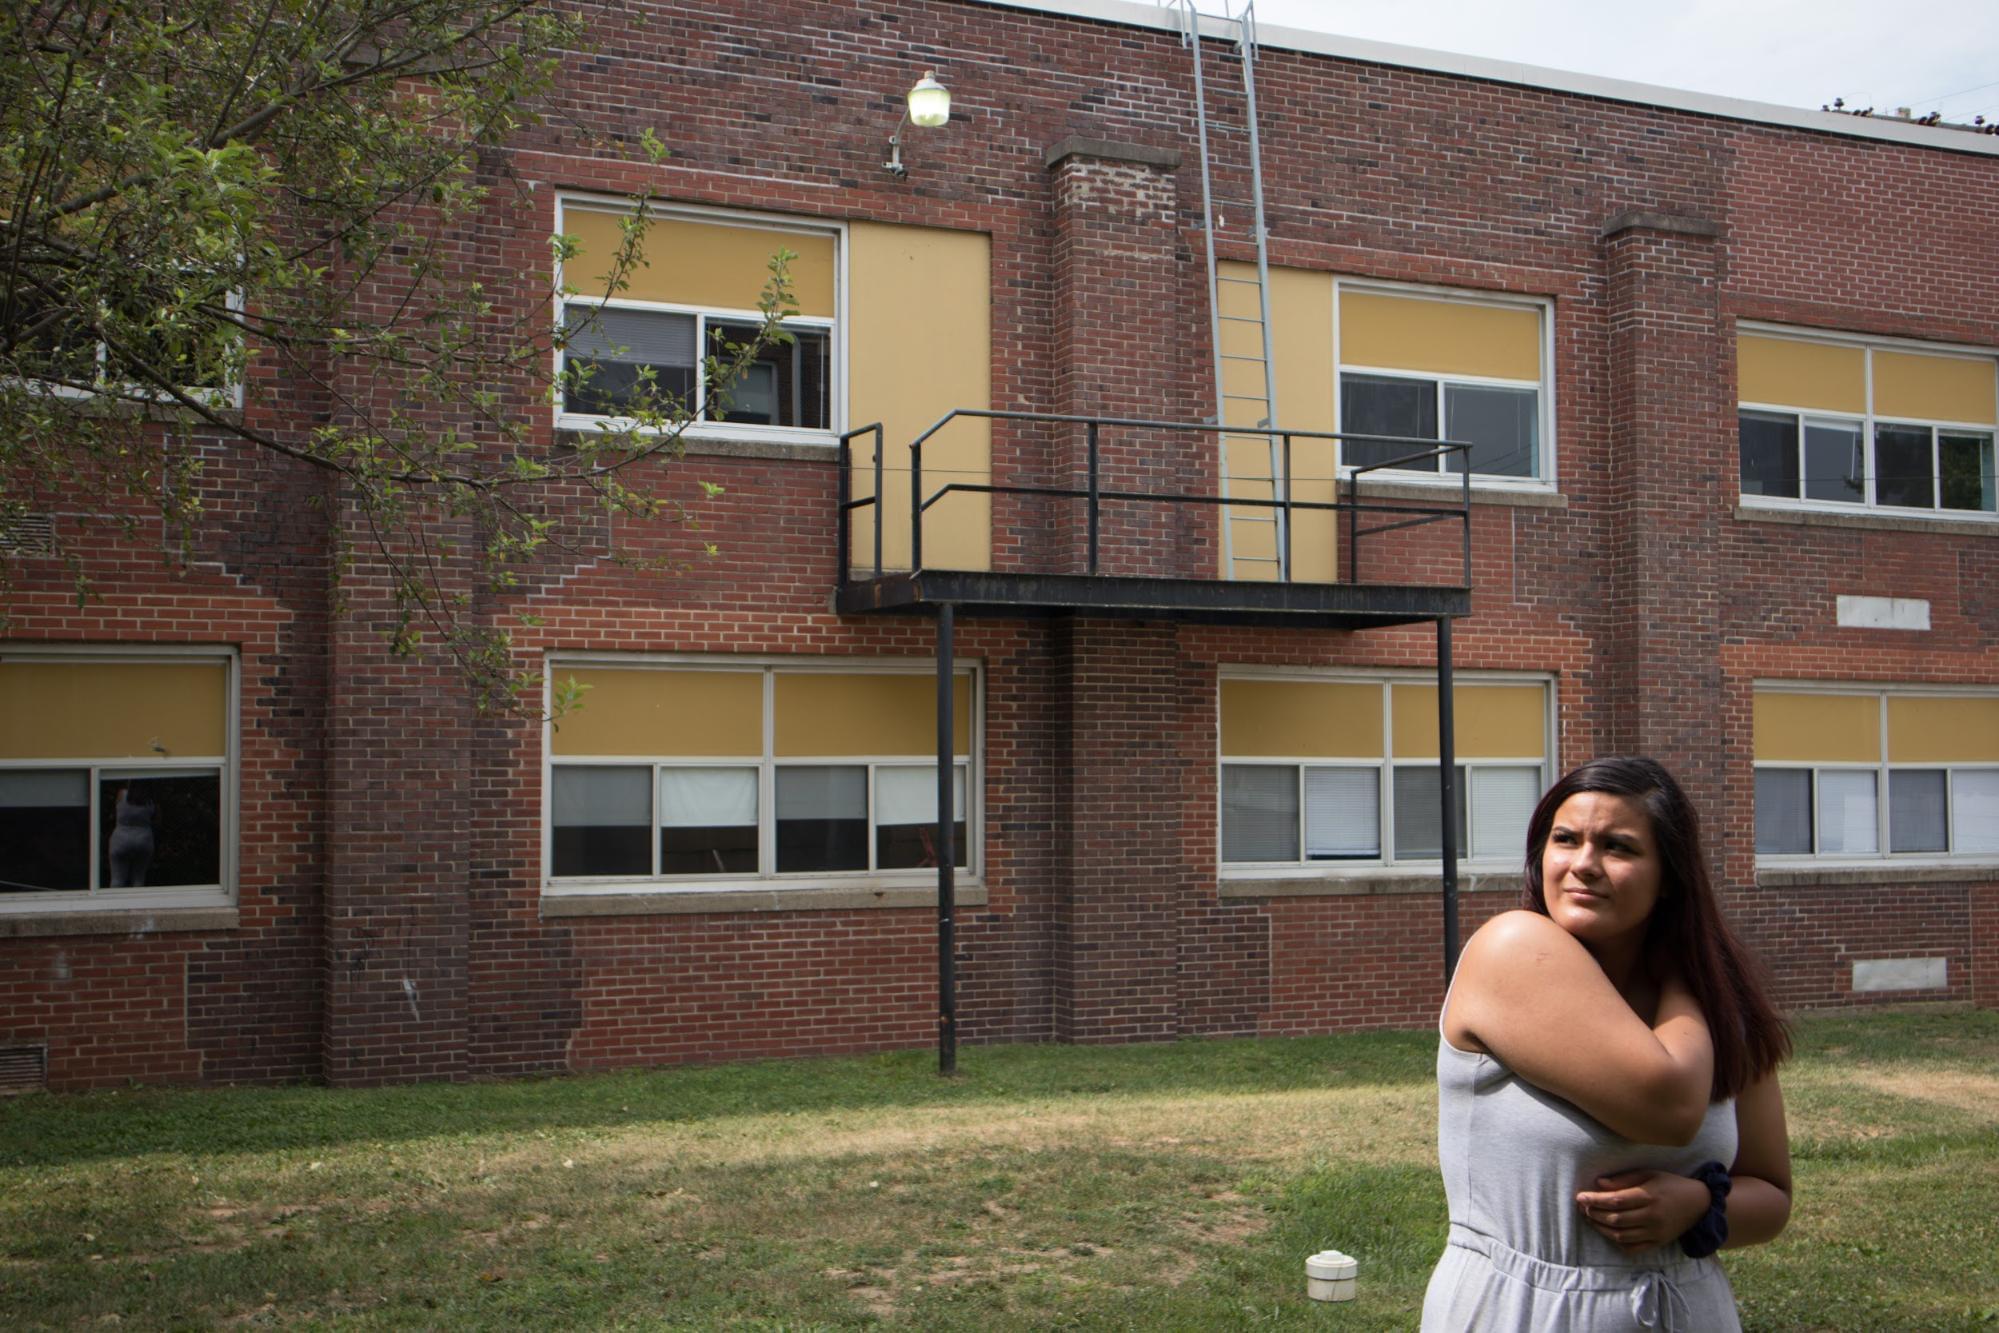 Yuliana Quintana, 19, stands outside DePue High School. DePue Community Unit School District 103 has only about half the money the district needs to provide students an adequate education.